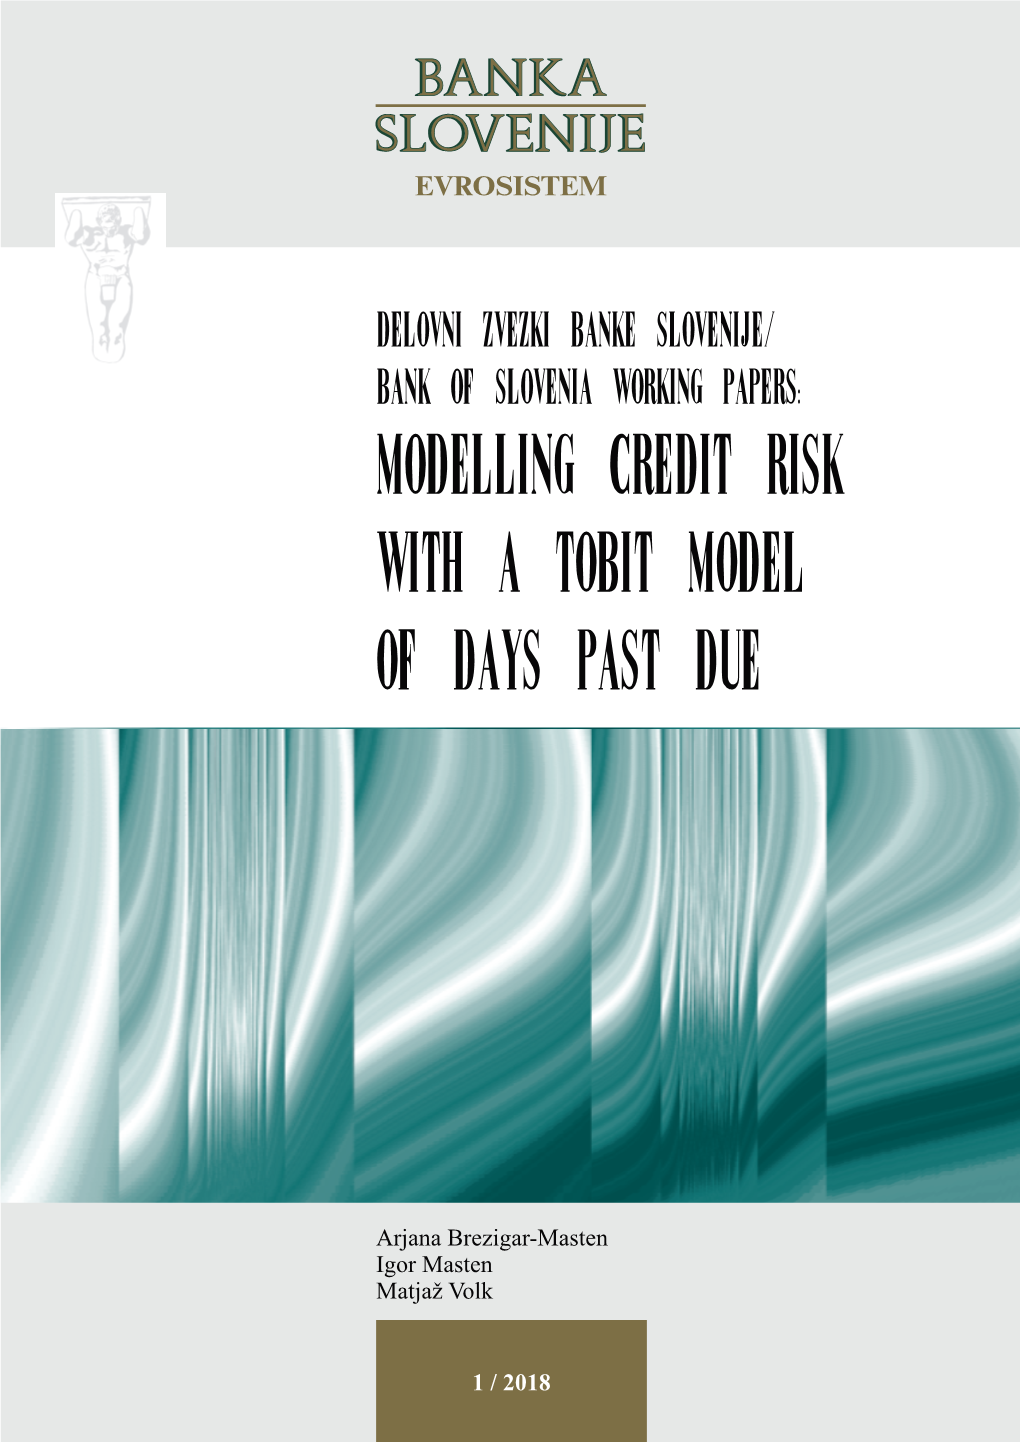 Modelling Credit Risk with a Tobit Model of Days Past Due